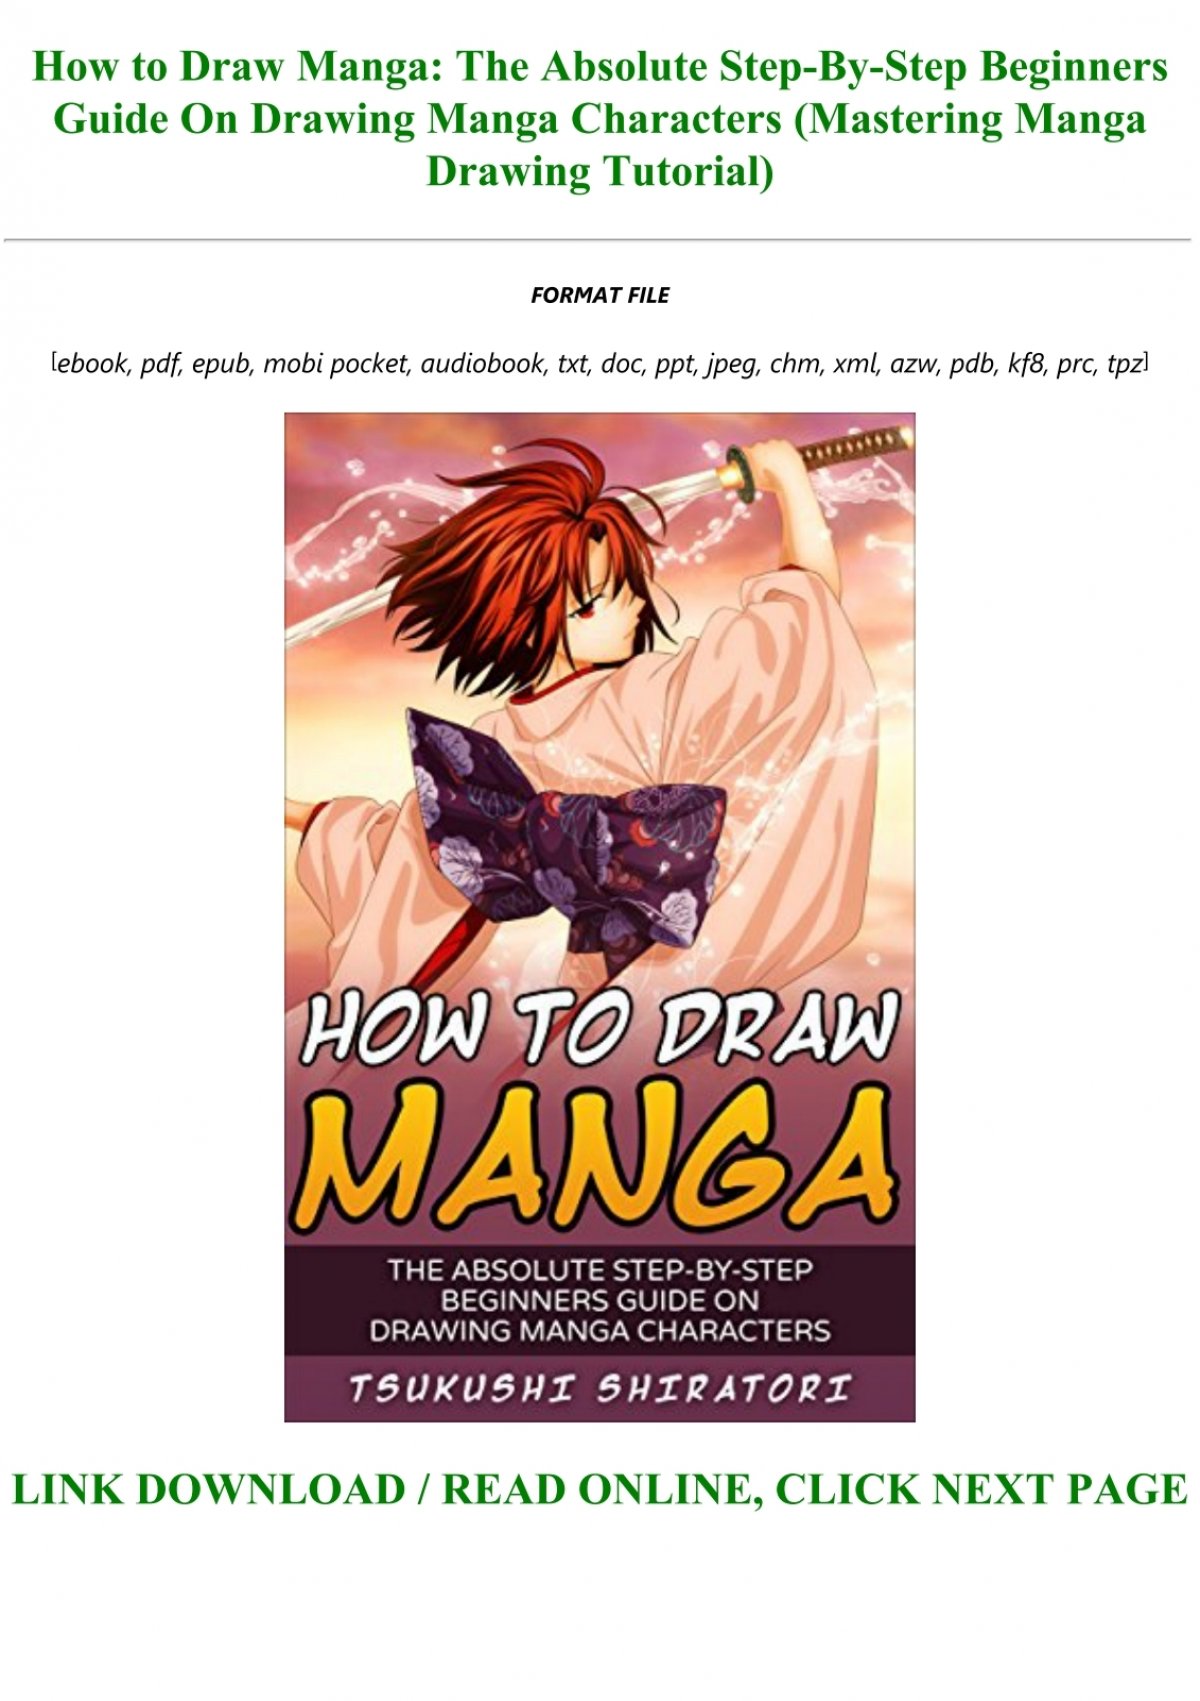 [PDF] How to Draw Manga: The Absolute Step-By-Step Beginners Guide On